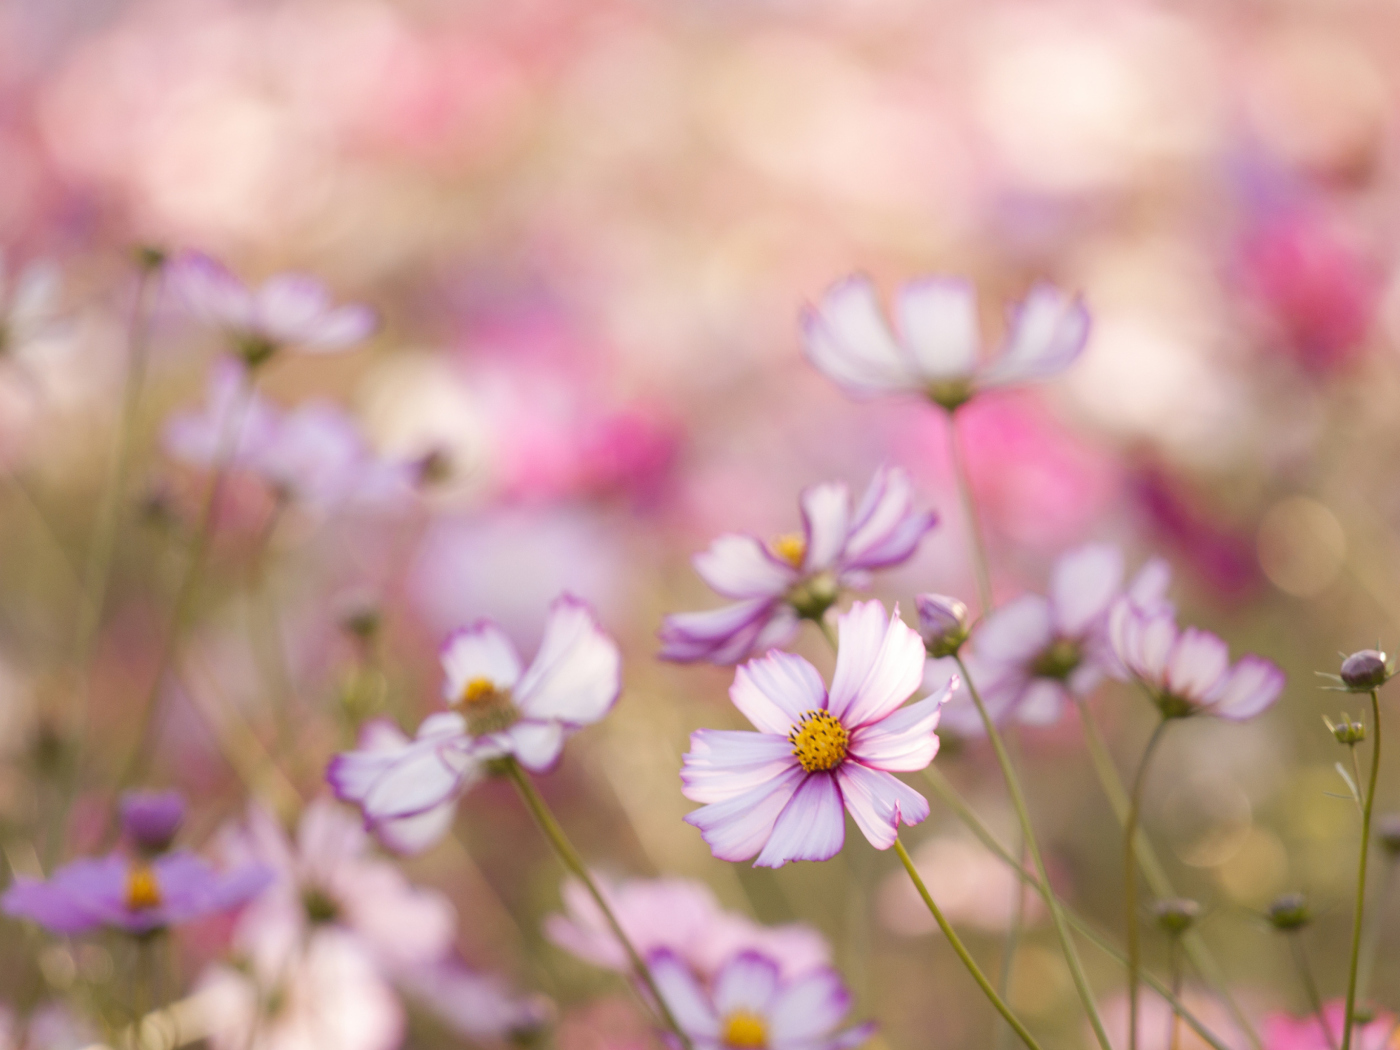 Das Field Of White And Pink Petals Wallpaper 1400x1050